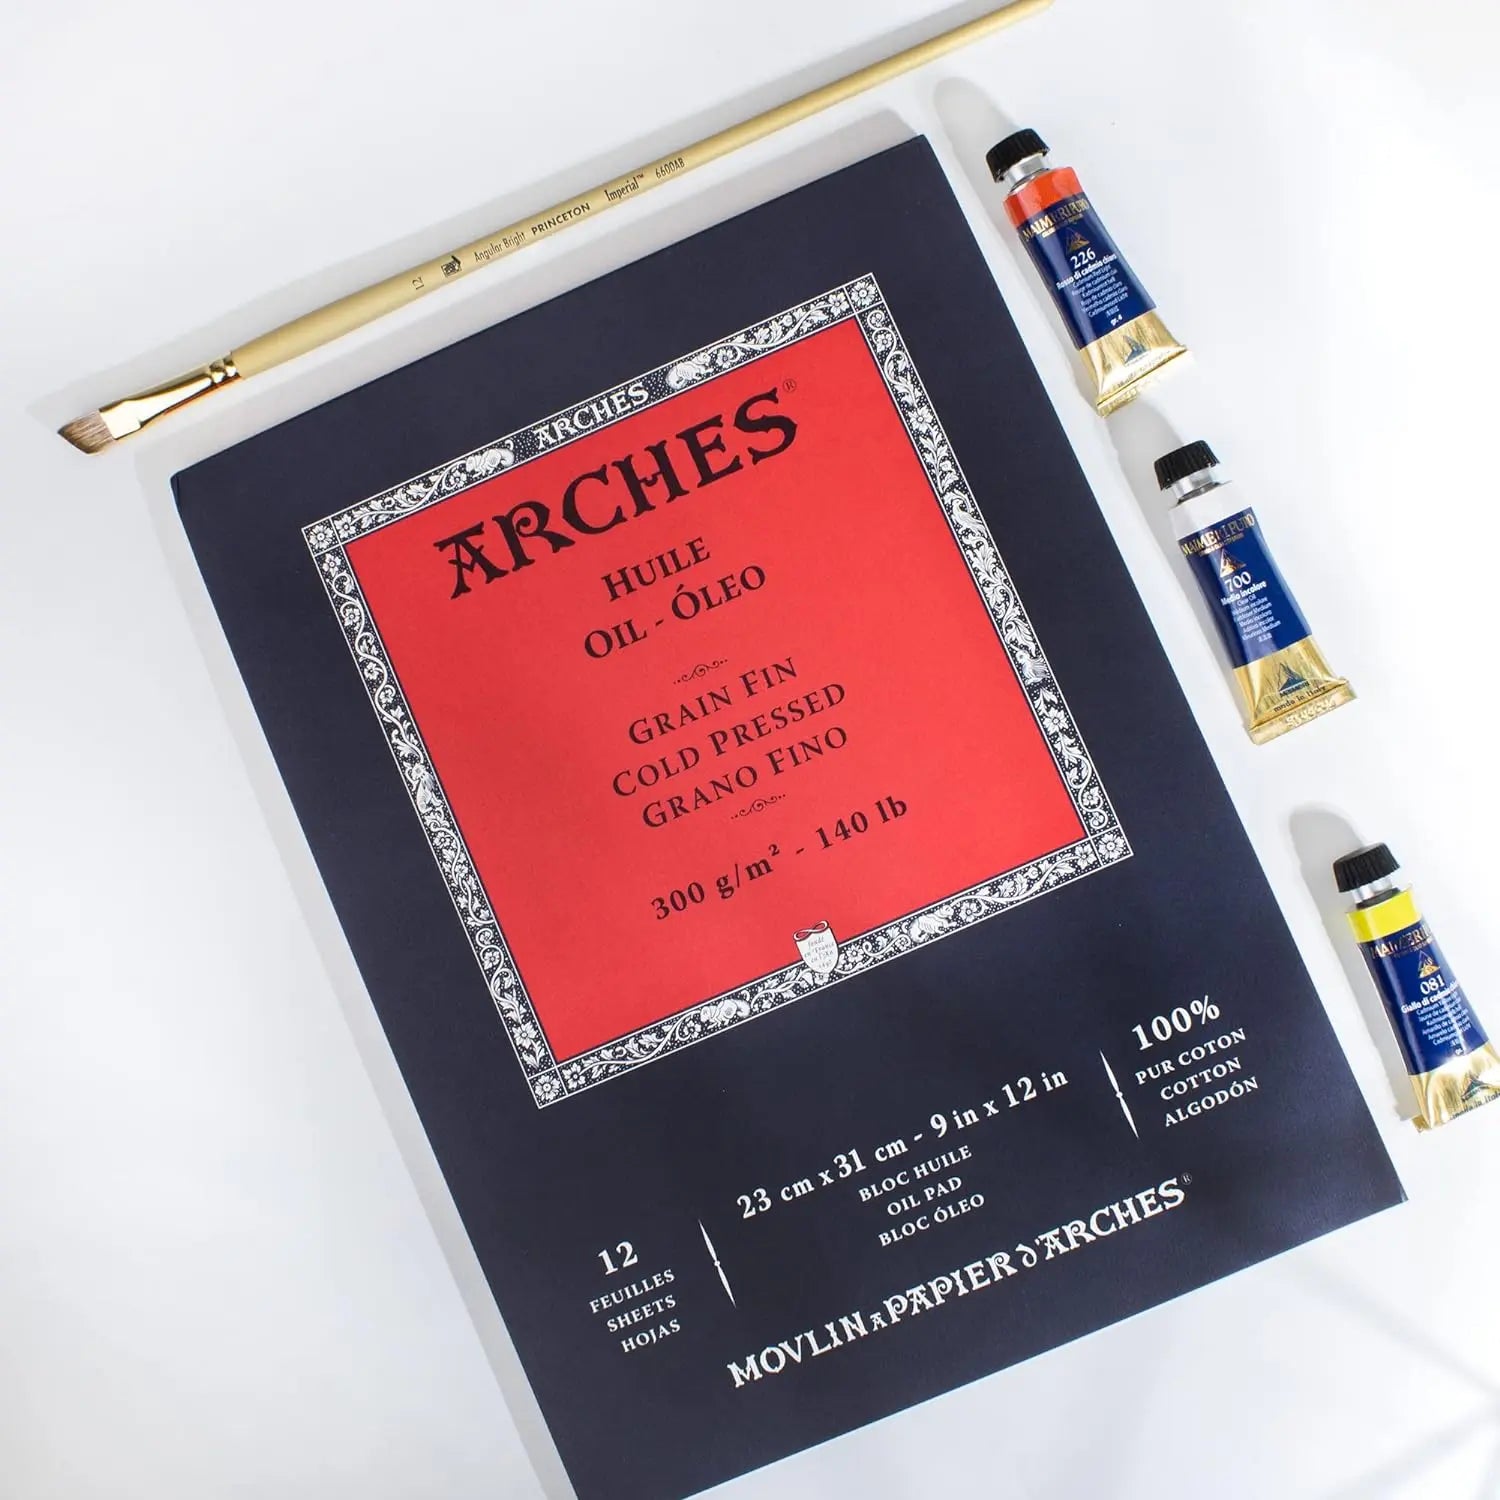 Arches Oil 300 GSM Cold Pressed White 23 x 31 cm Paper Pad, 12 Sheets arches